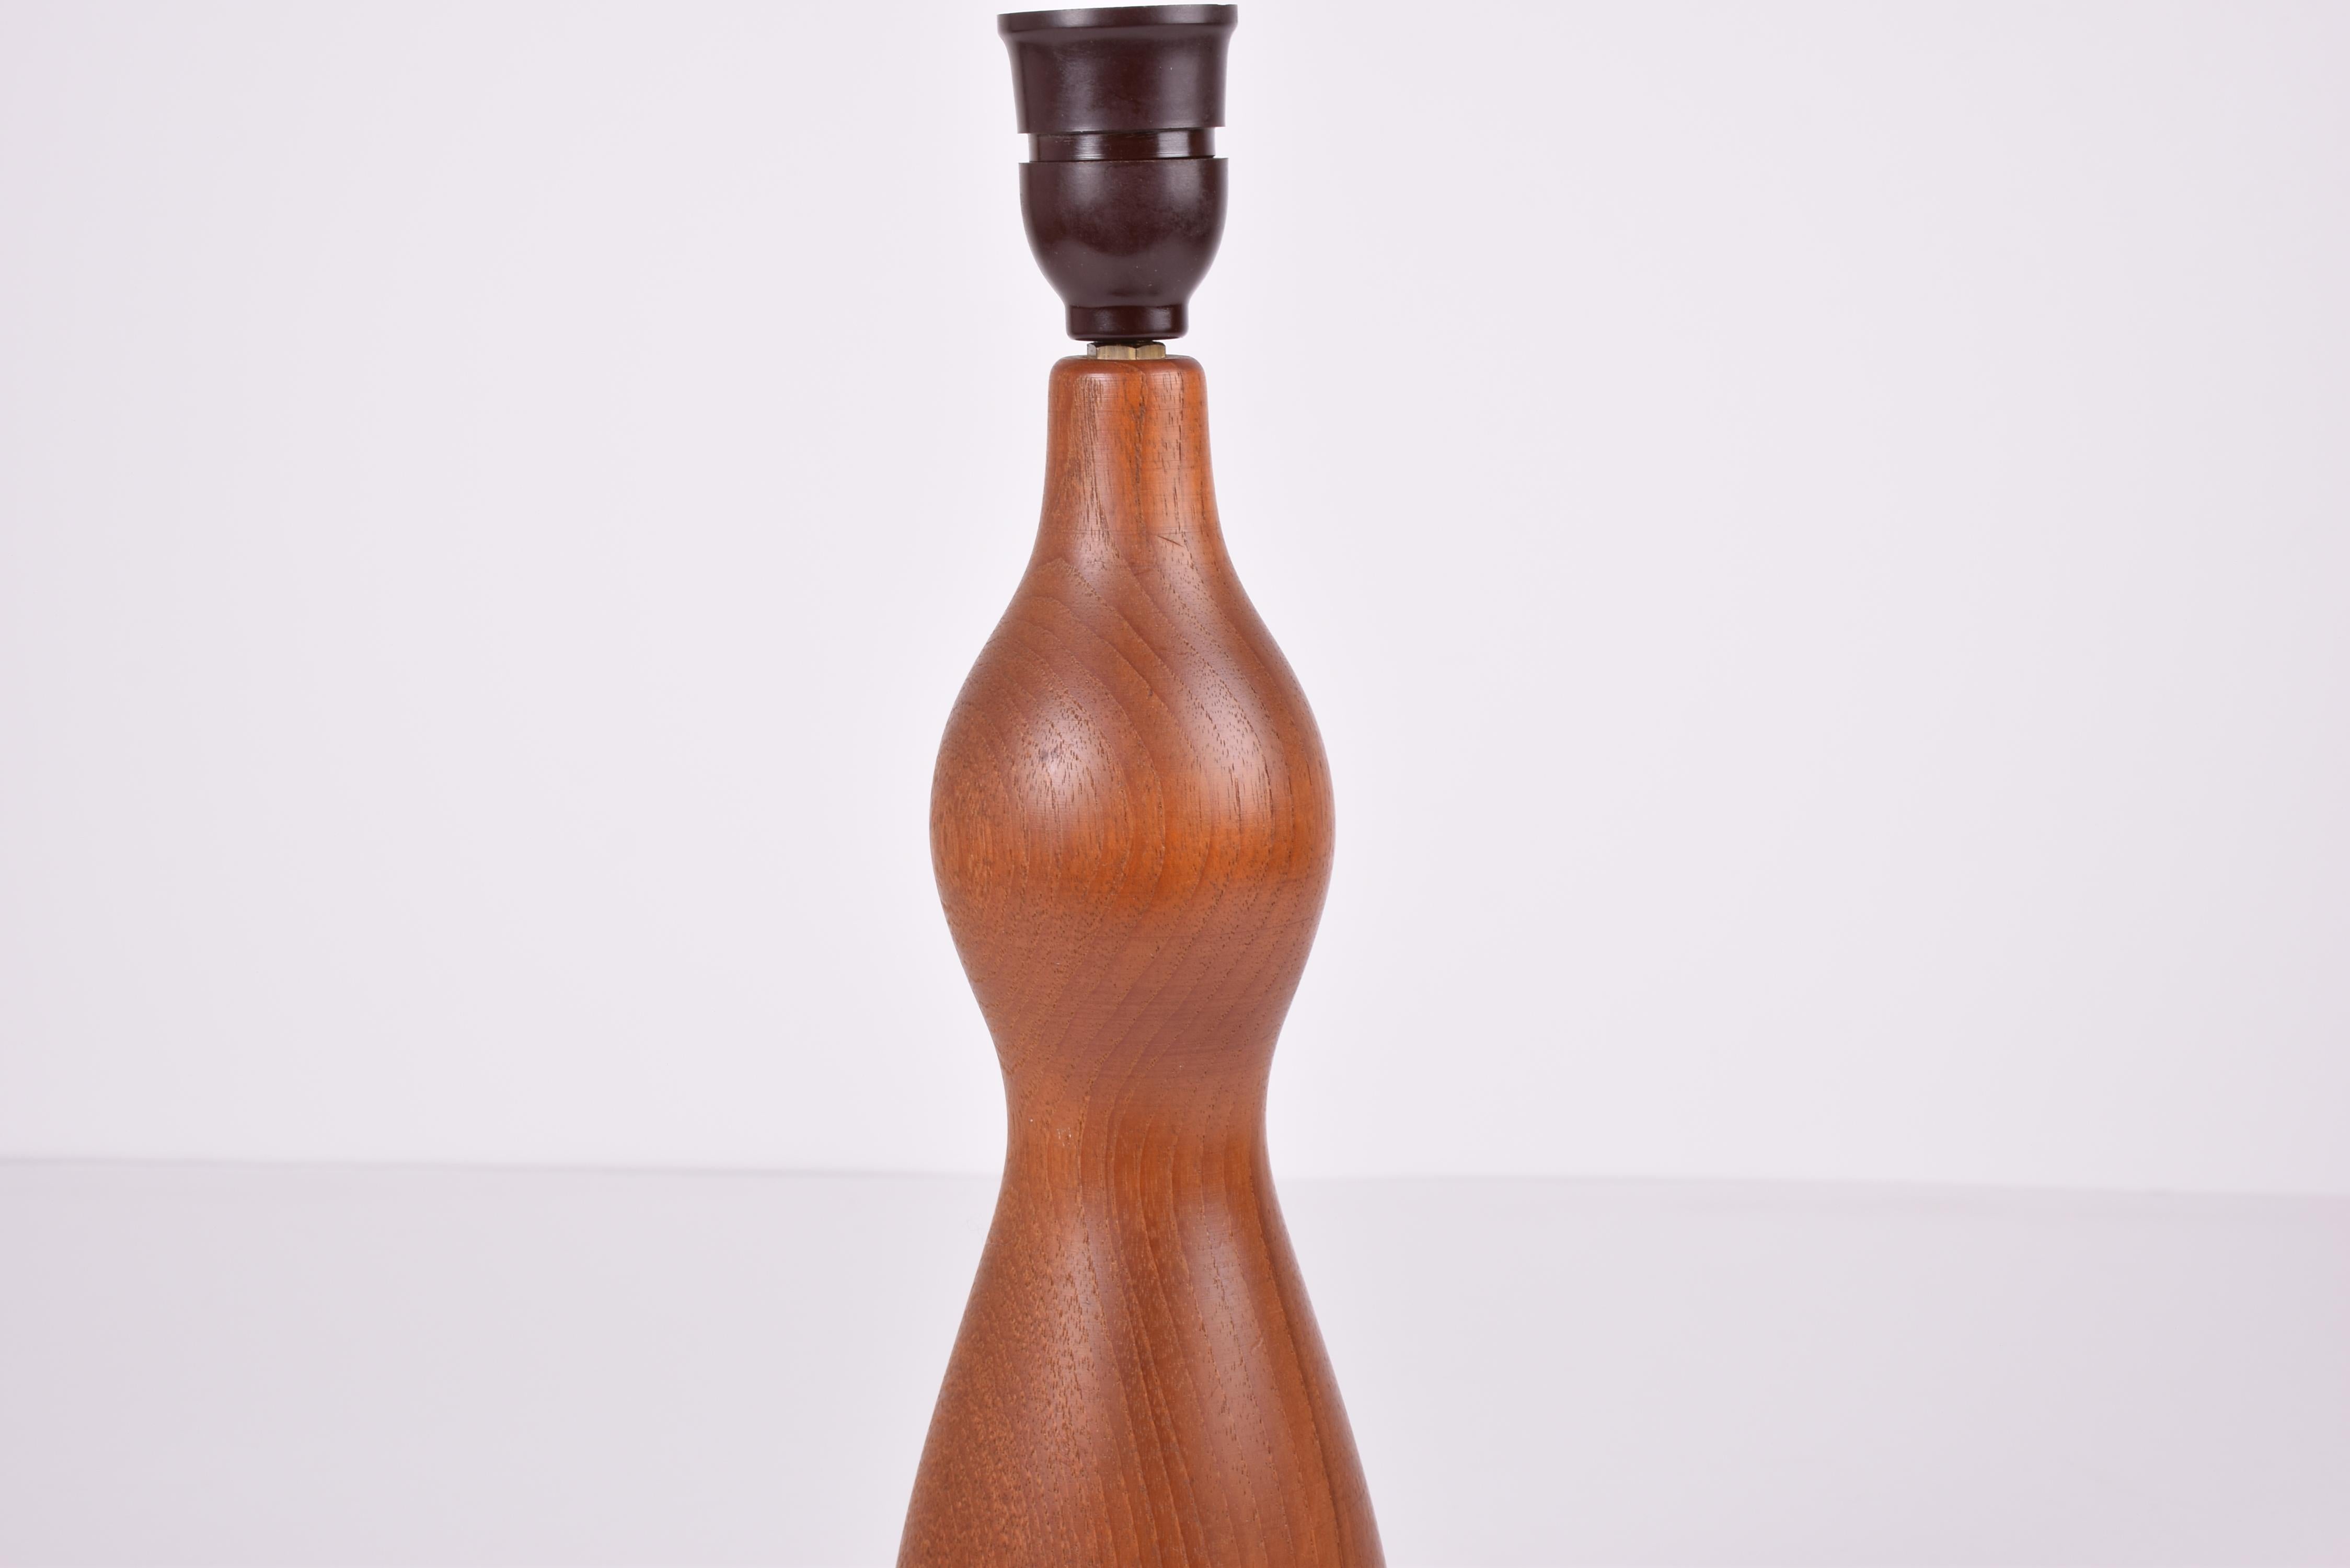 Scandinavian Midcentury Sculptural Teak Table Lamp with Shade, 1960s For Sale 1